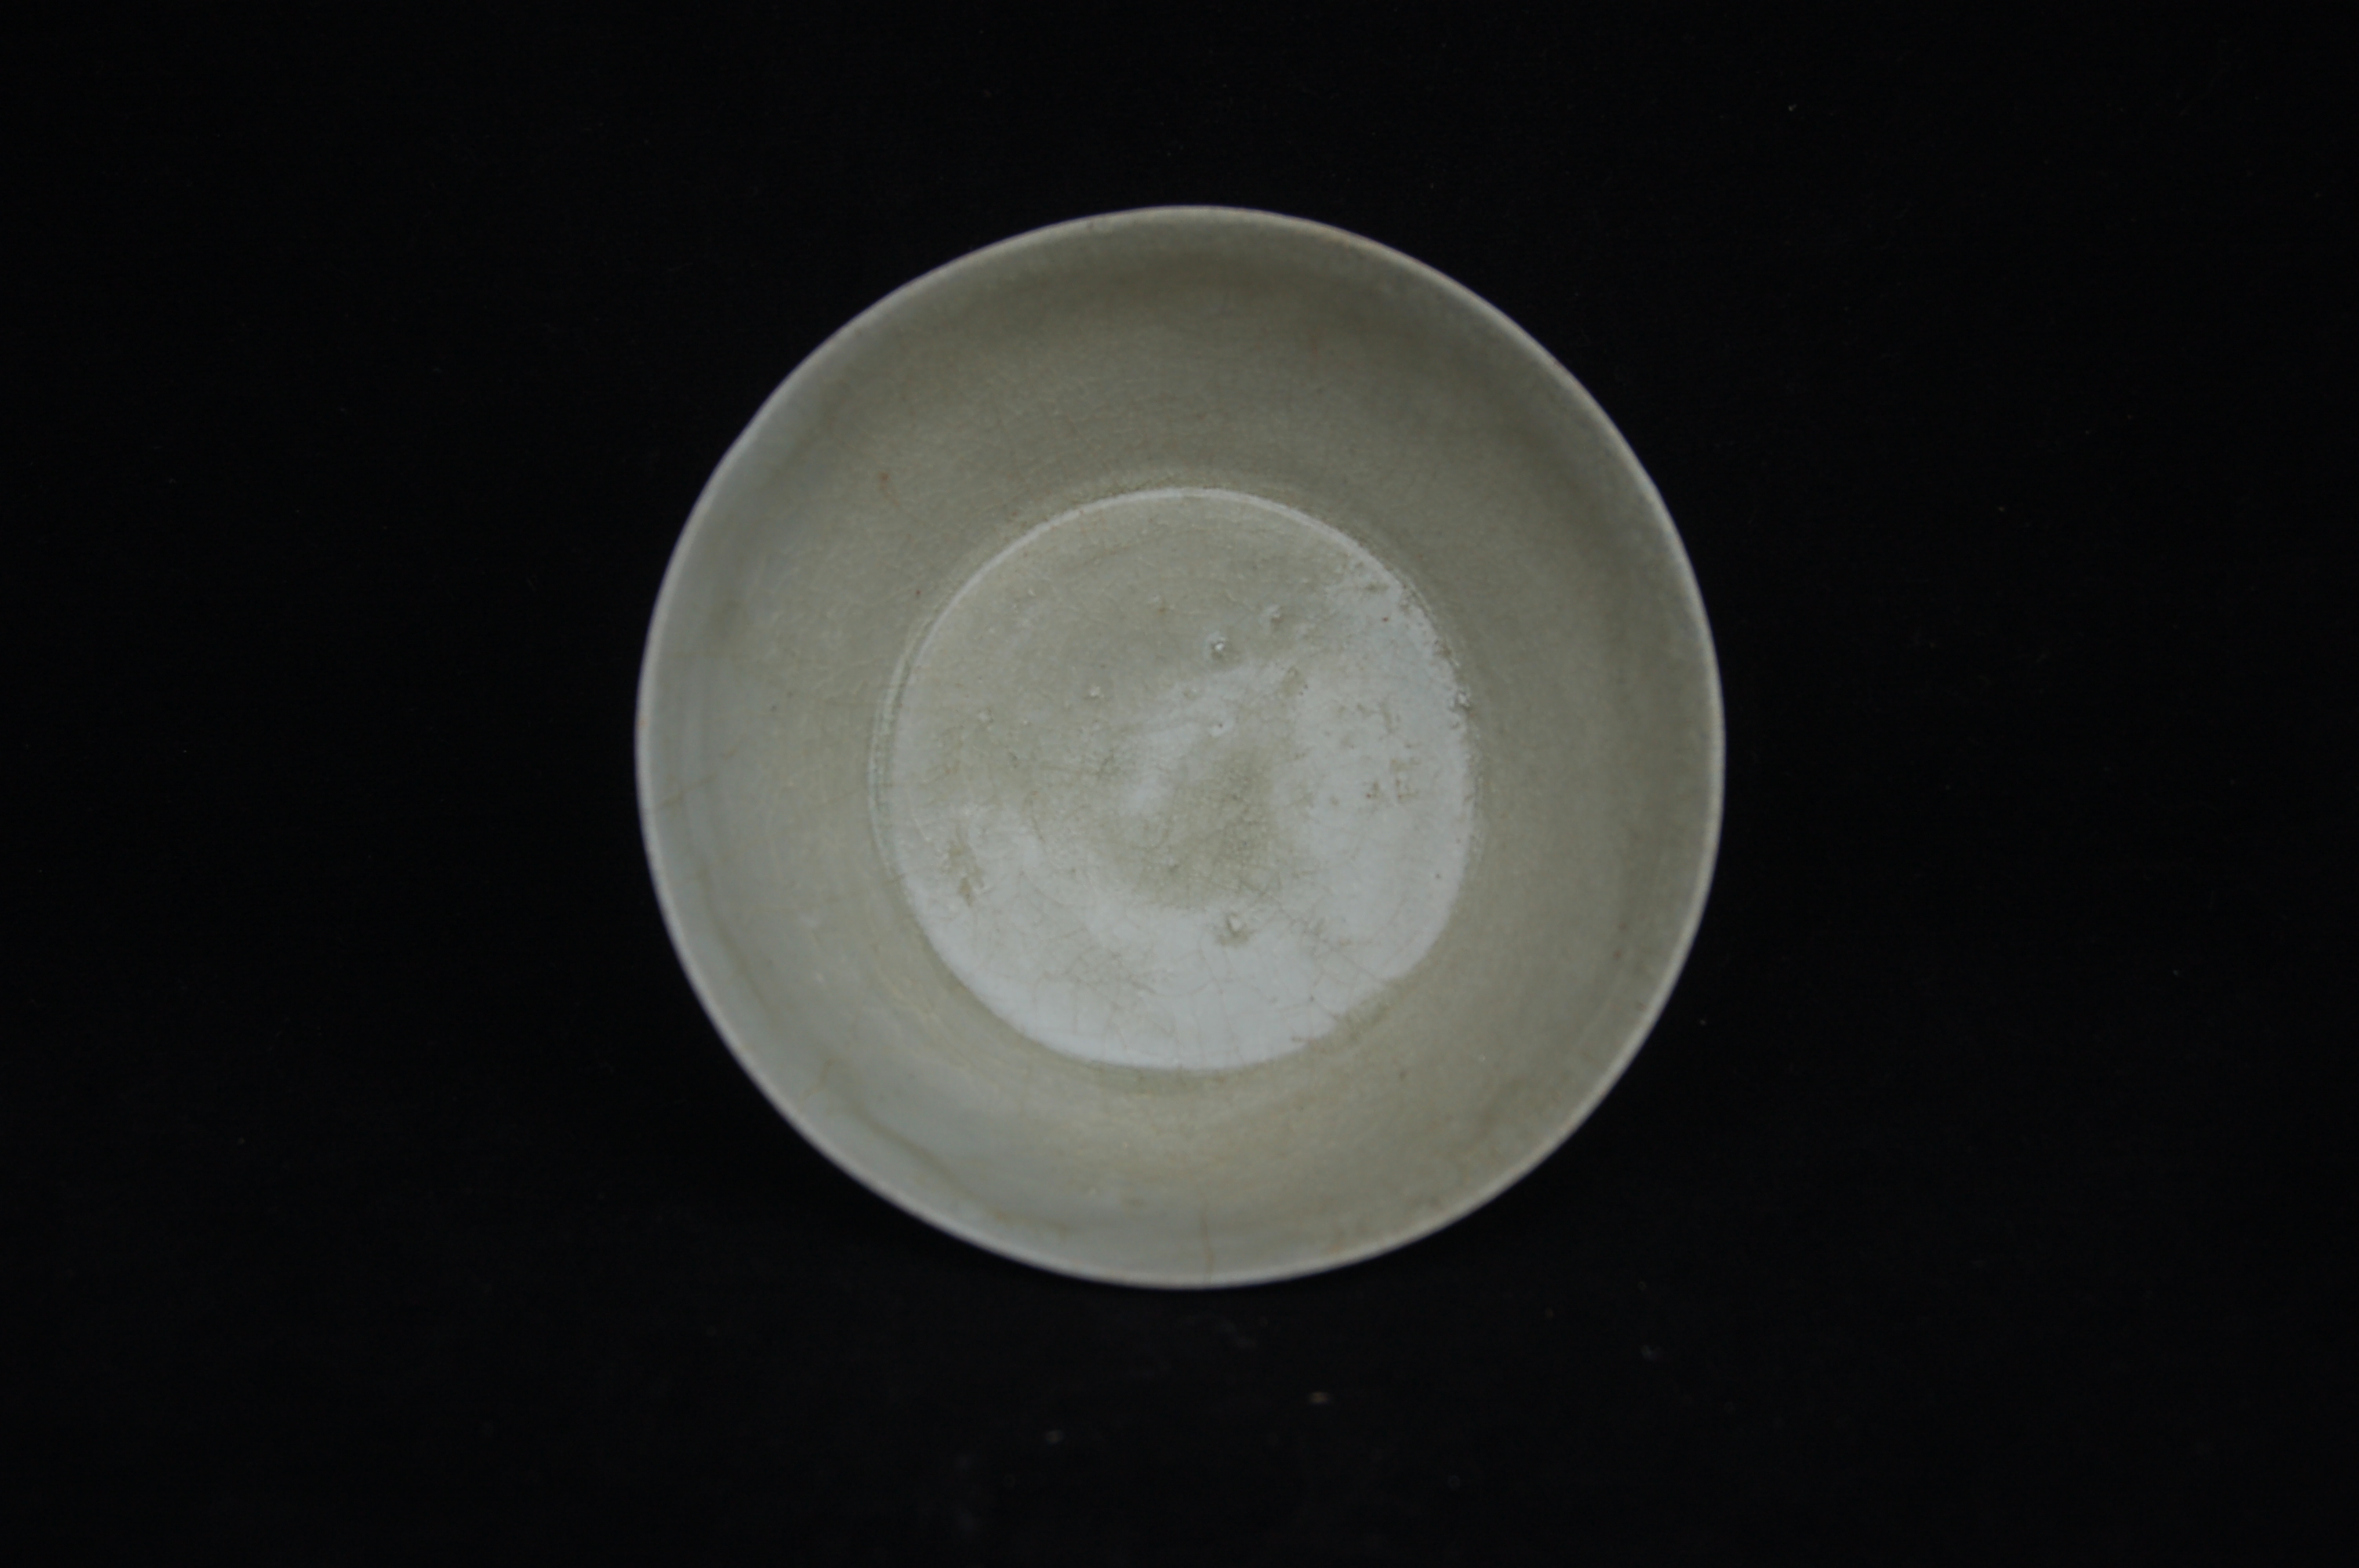 Small bowl with slightly everted rim, rounded wall with incised striations, on a high carved foot-ring. Diameter 12 cm, height 5 cm.